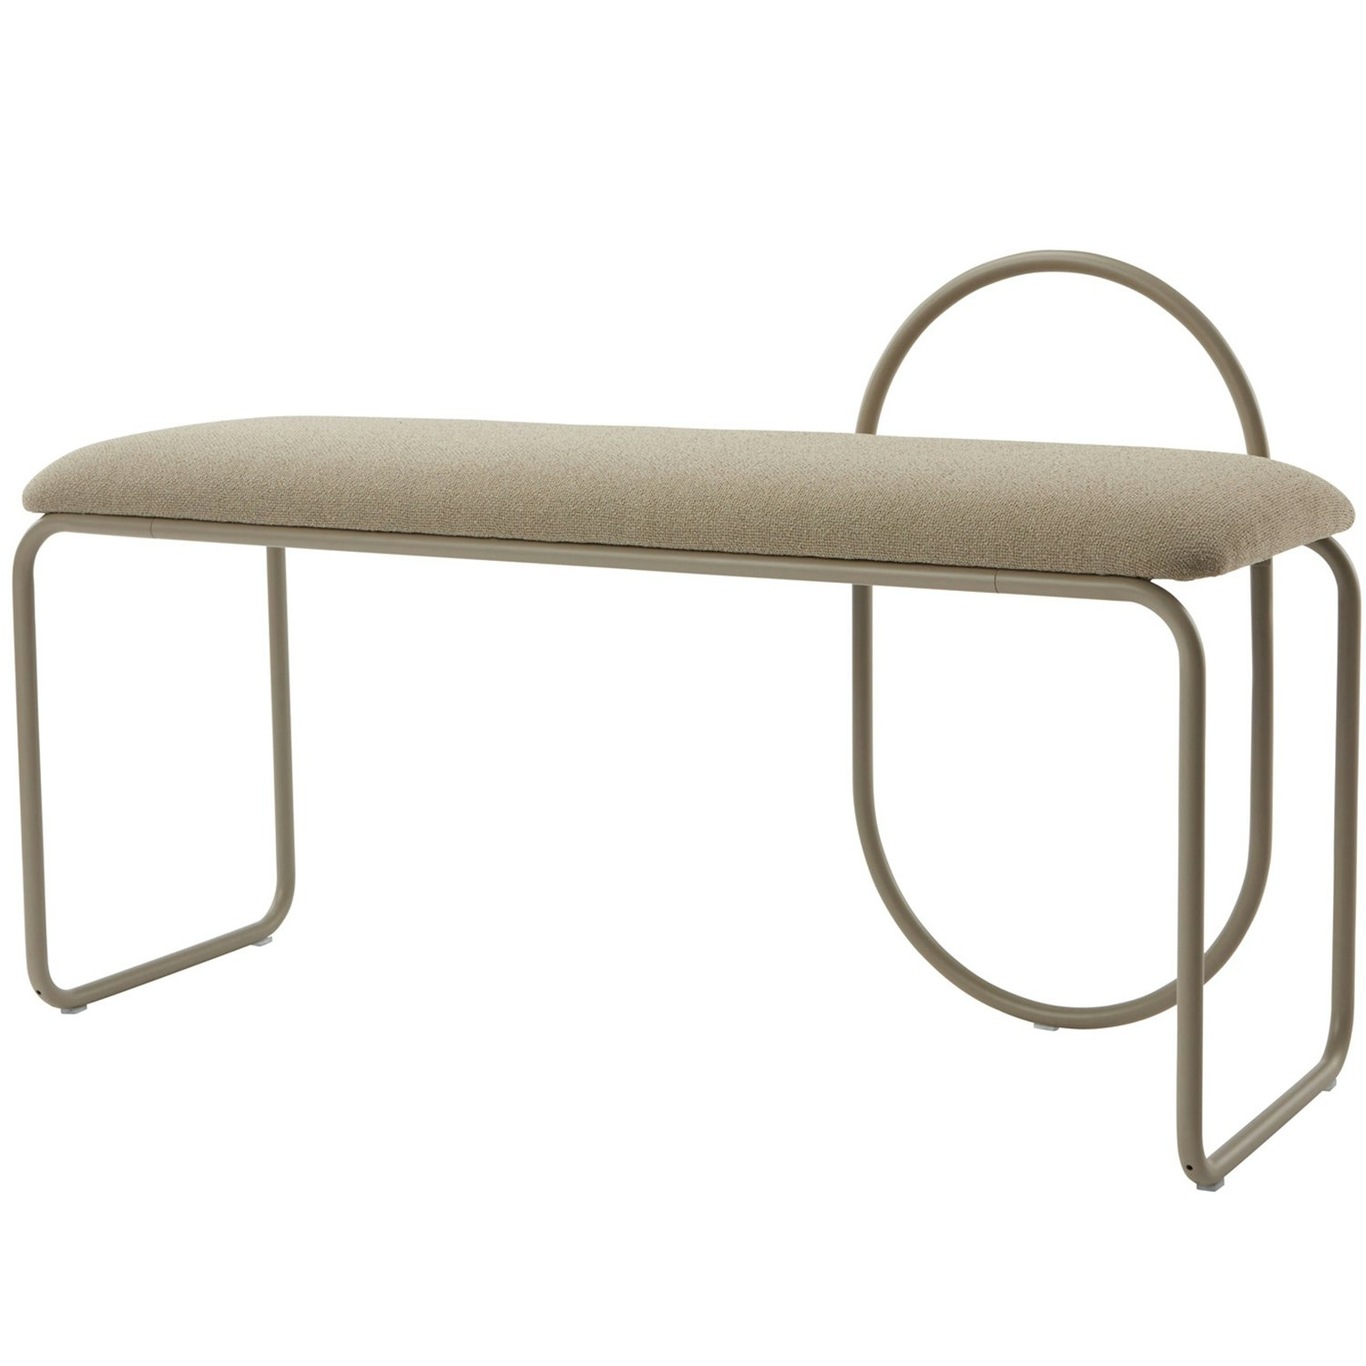 Angui Bench, Taupe